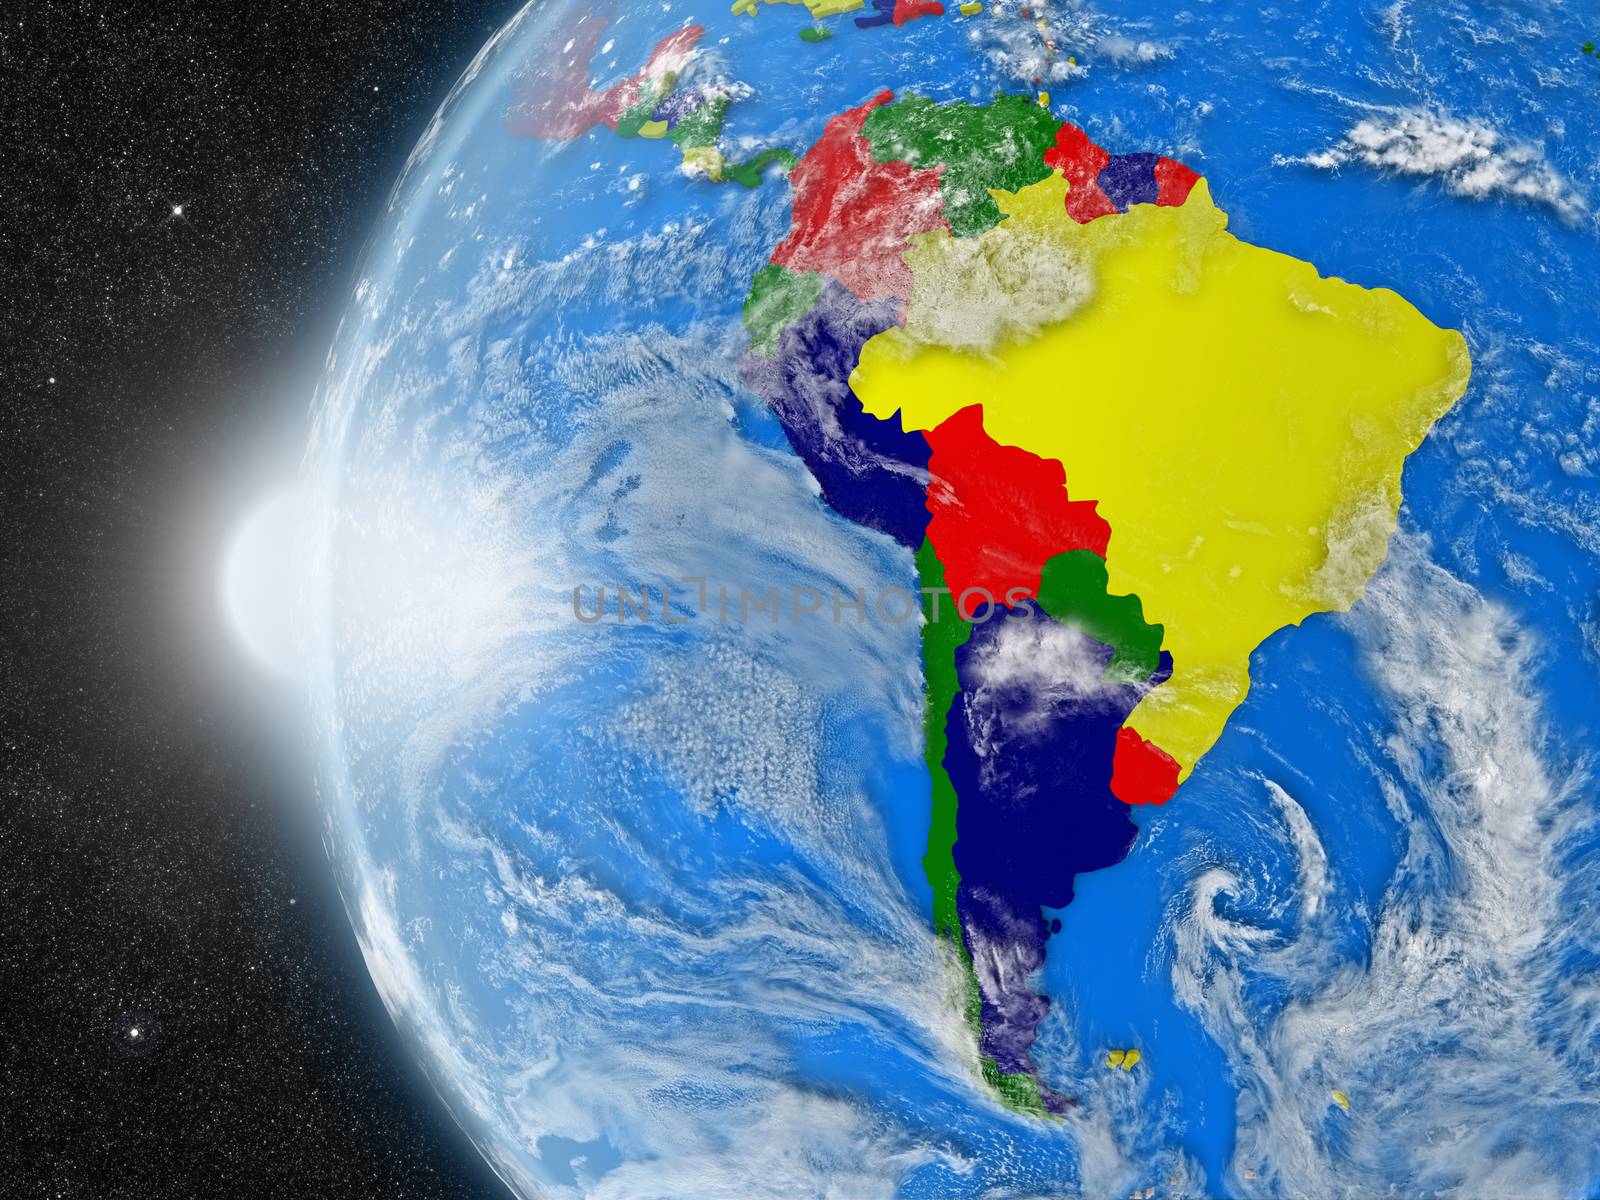 Concept of planet Earth as seen from space but with political borders aimed at south american continent